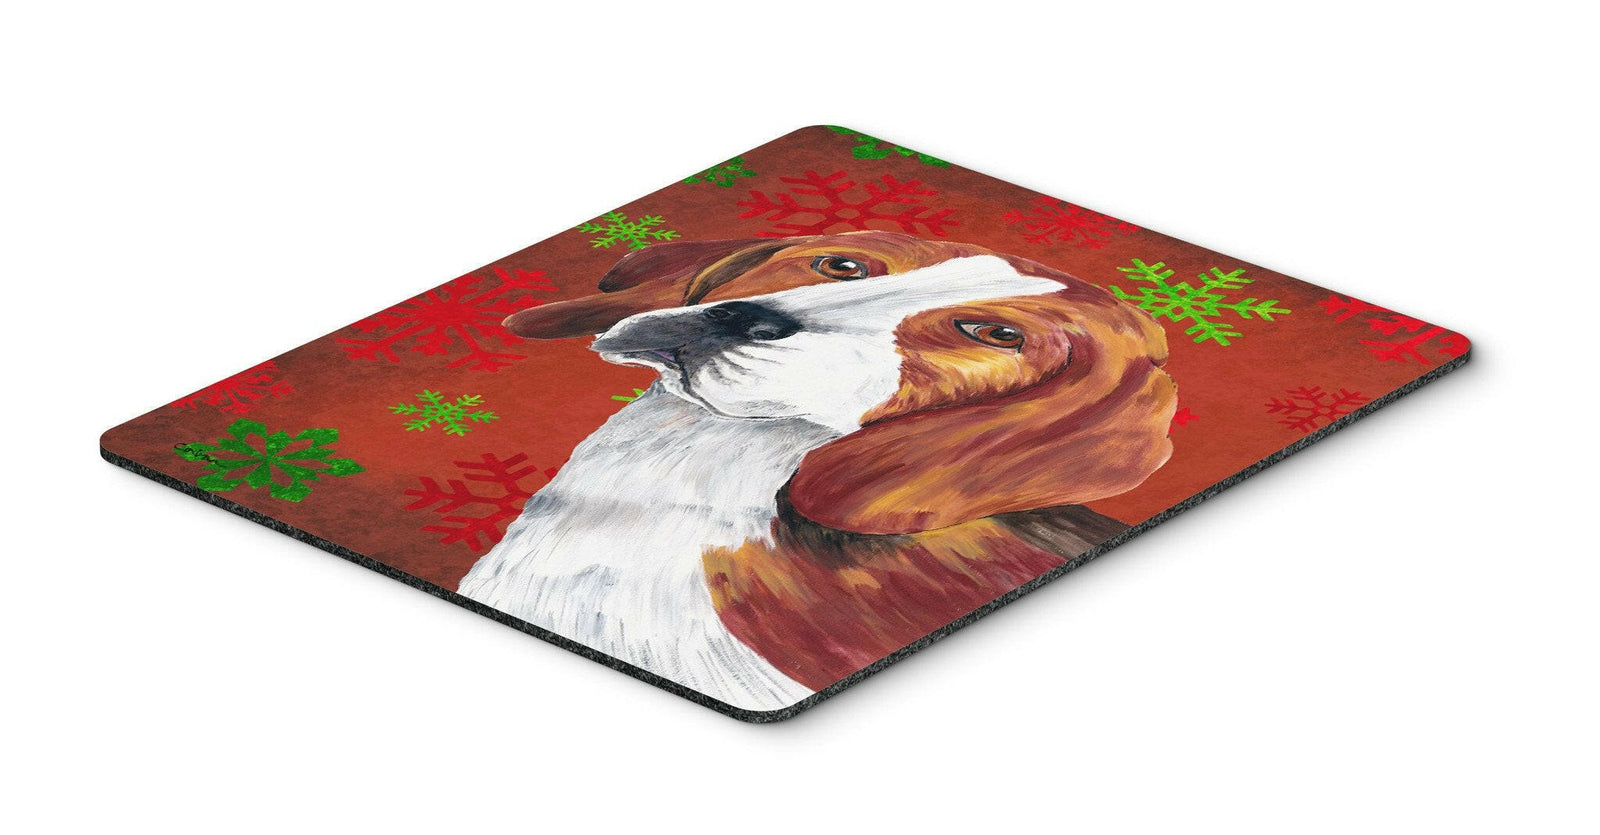 Beagle Red and Green Snowflakes Holiday Christmas Mouse Pad, Hot Pad or Trivet by Caroline's Treasures